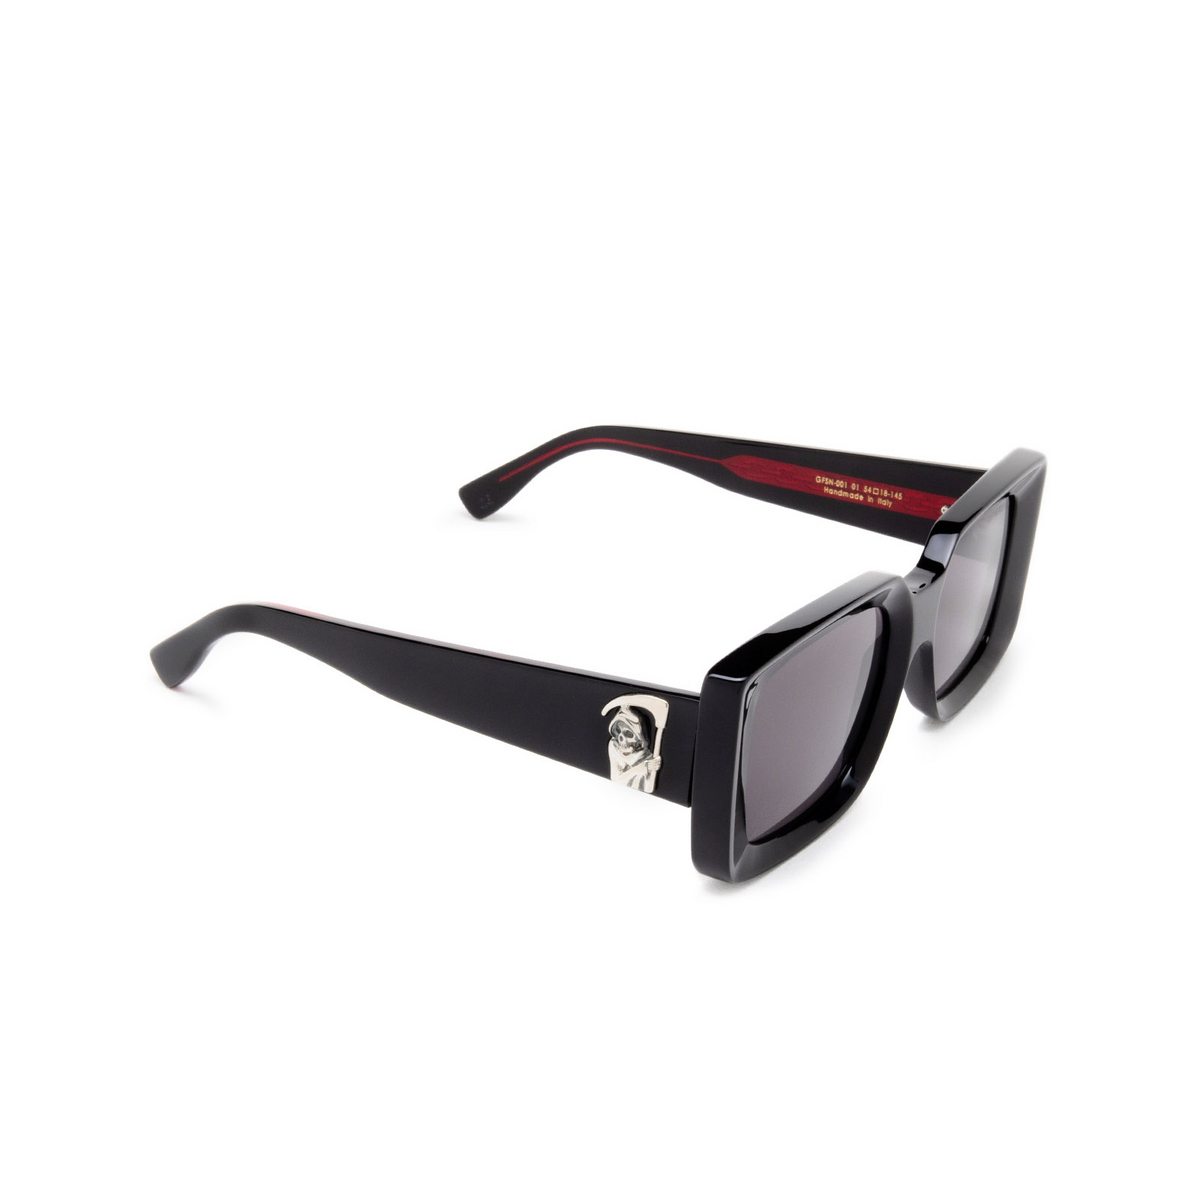 Cutler and Gross 001 Sunglasses 01 Black - three-quarters view